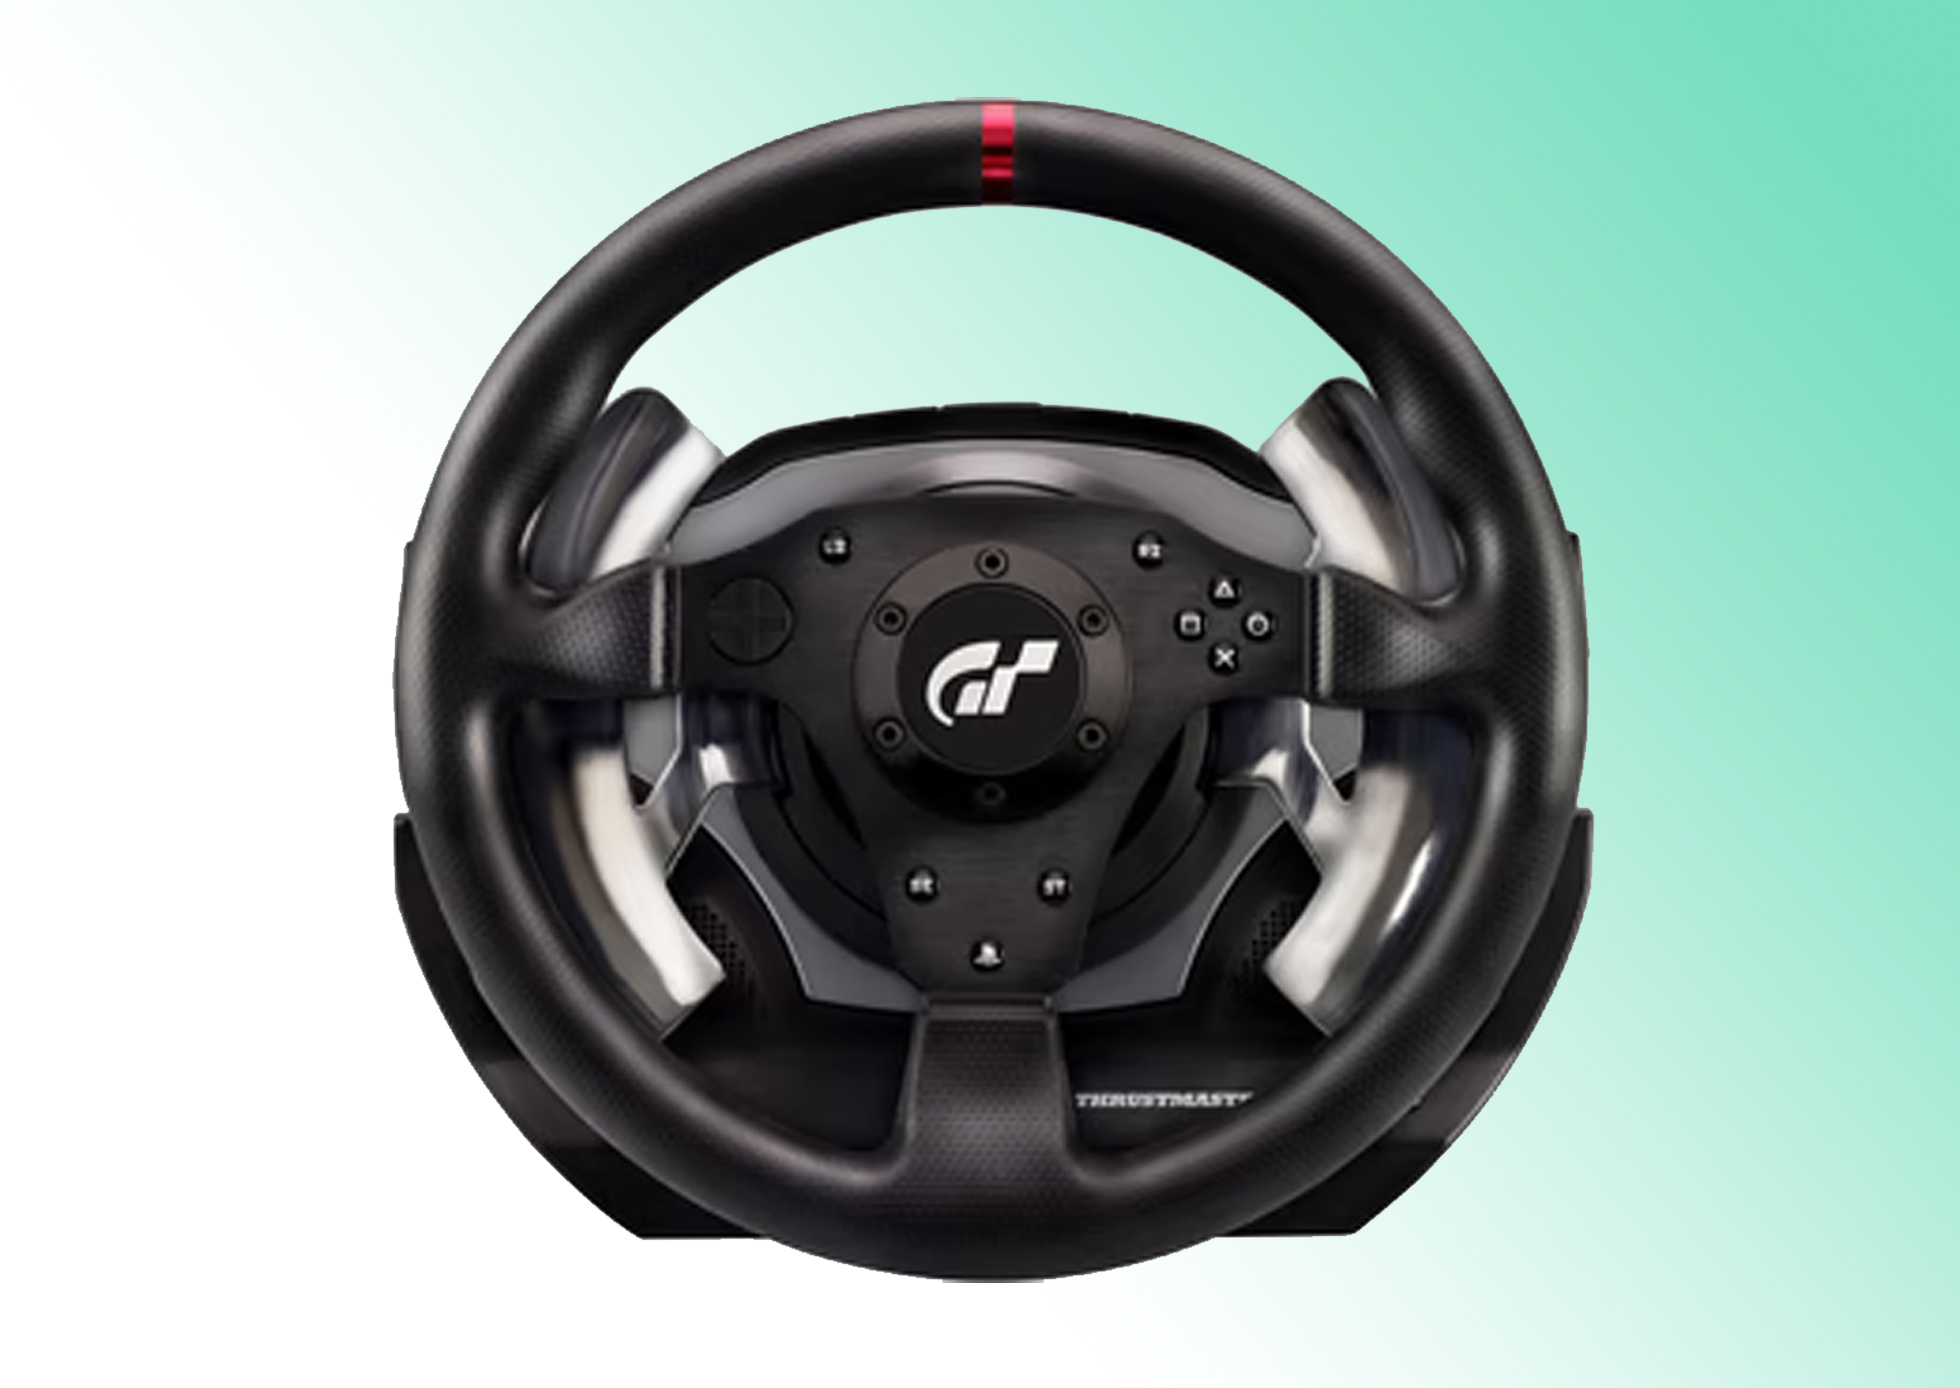 Test and Reviews of the Thrustmaster T500 RS steering wheel